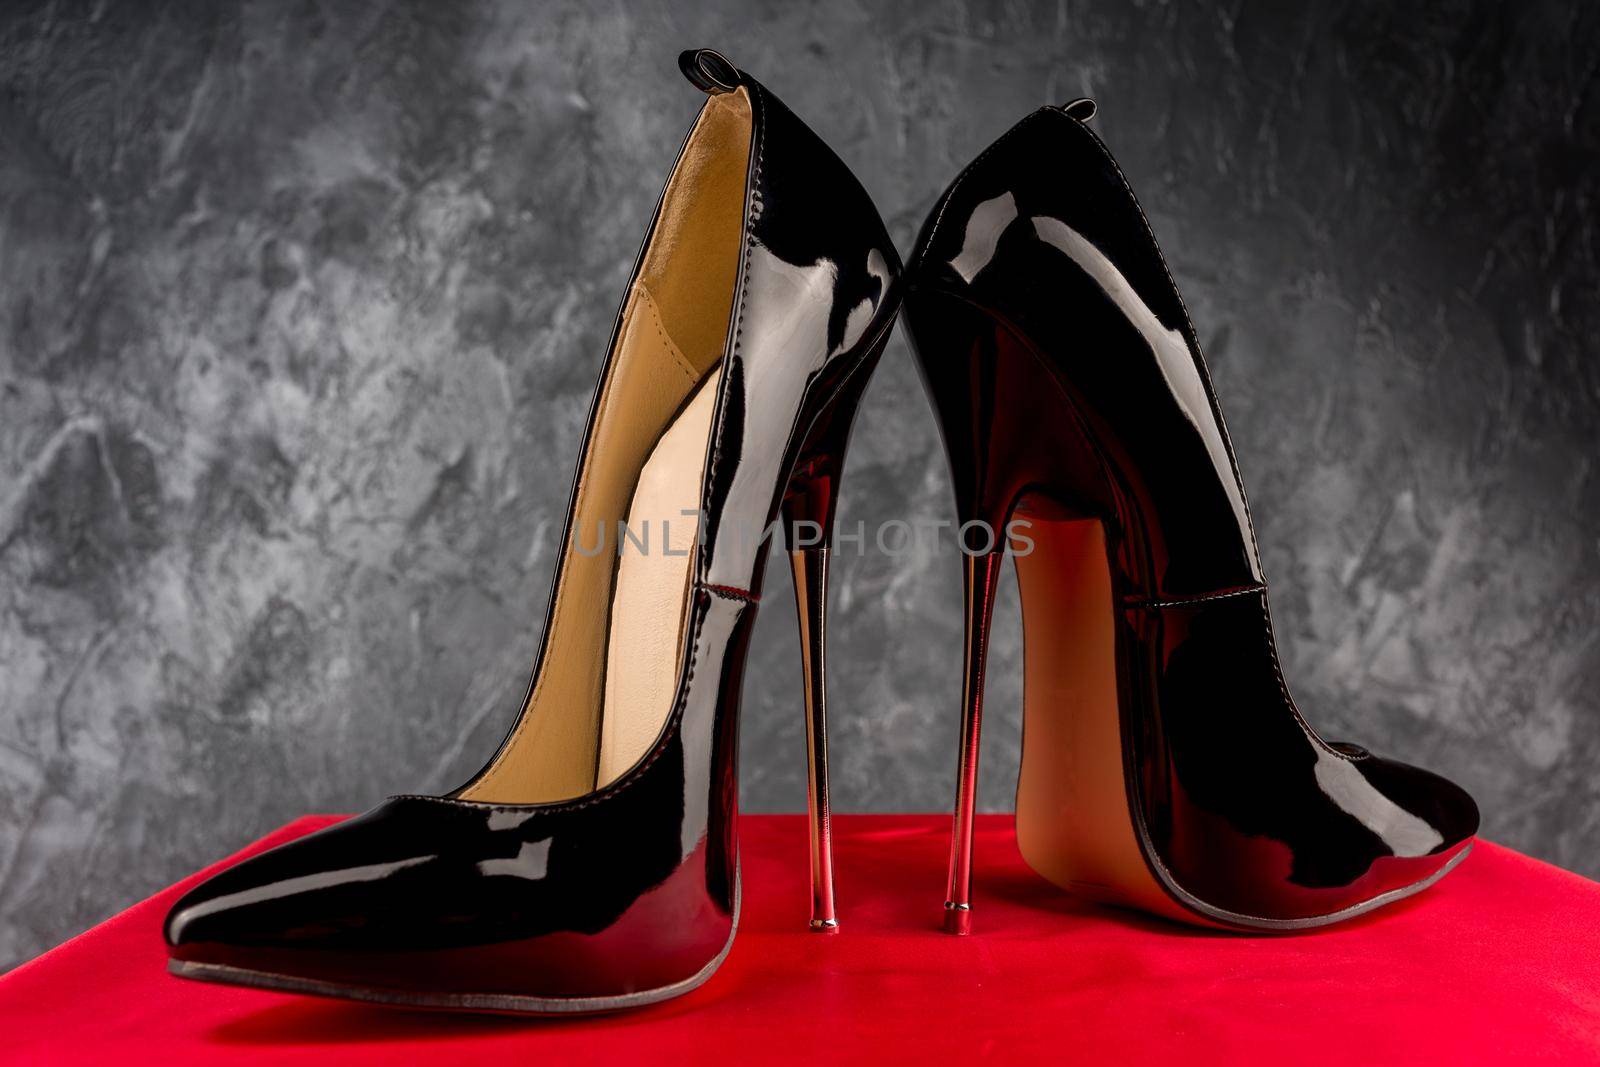 Black fetish shiny patent leather stiletto high heels with ankle strap by zartarn